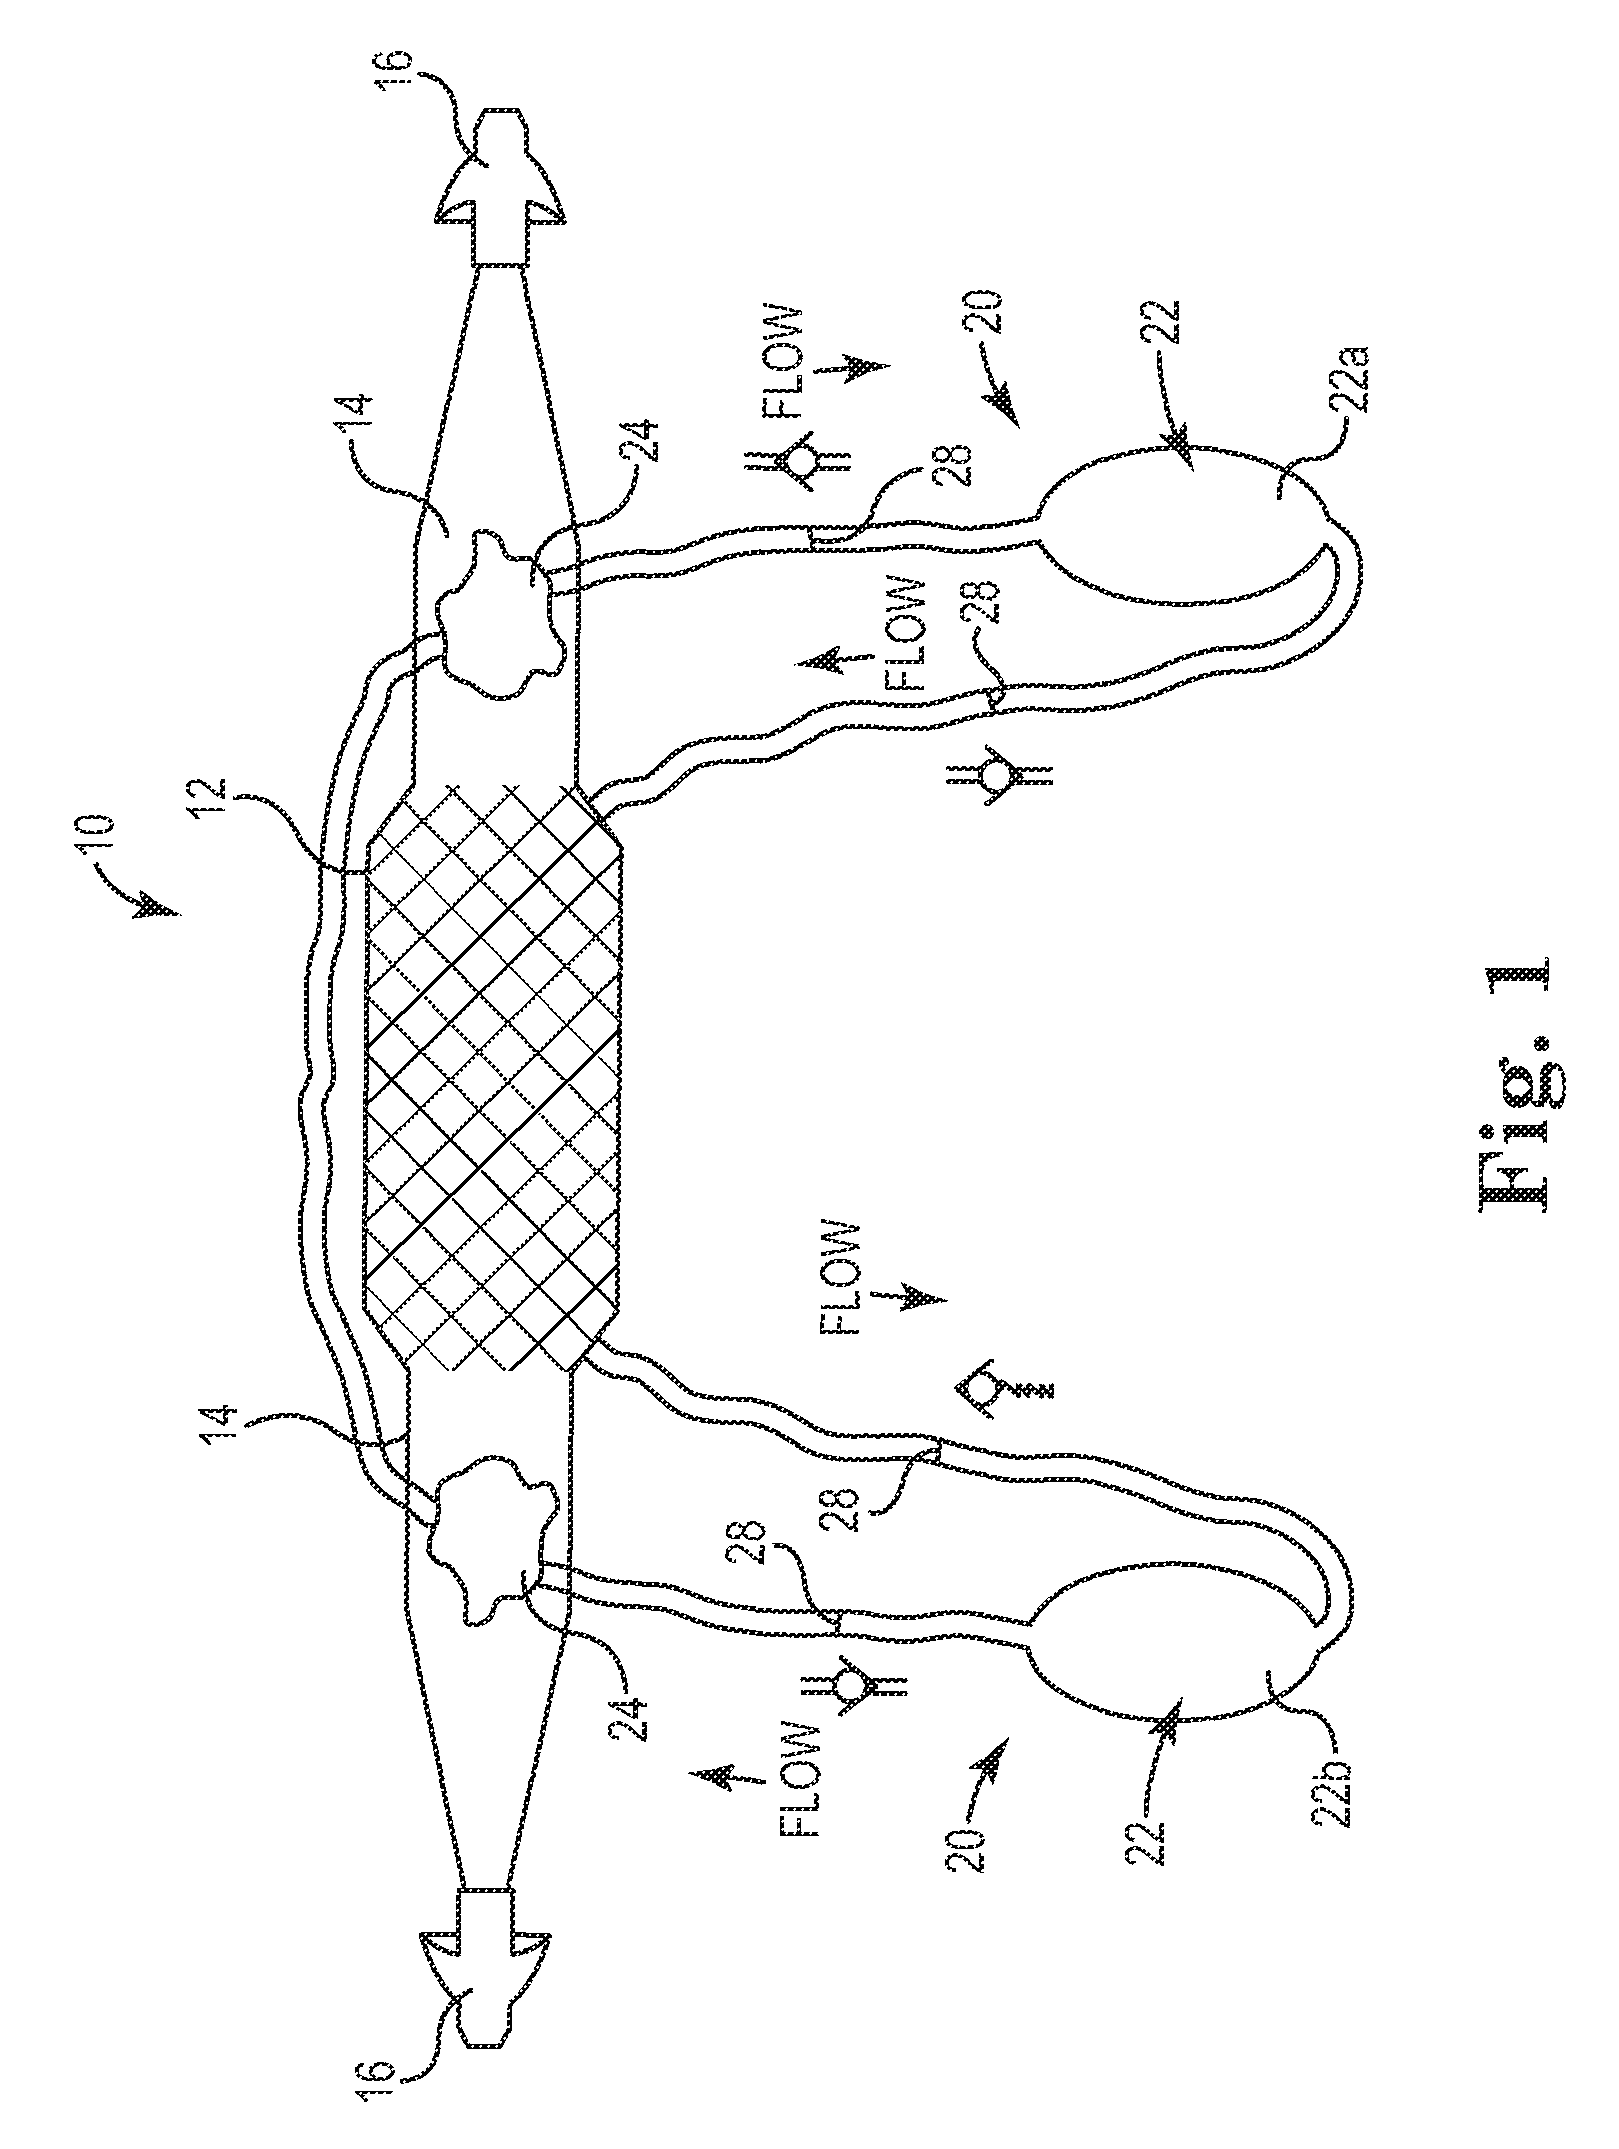 Implant tension adjustment system and method